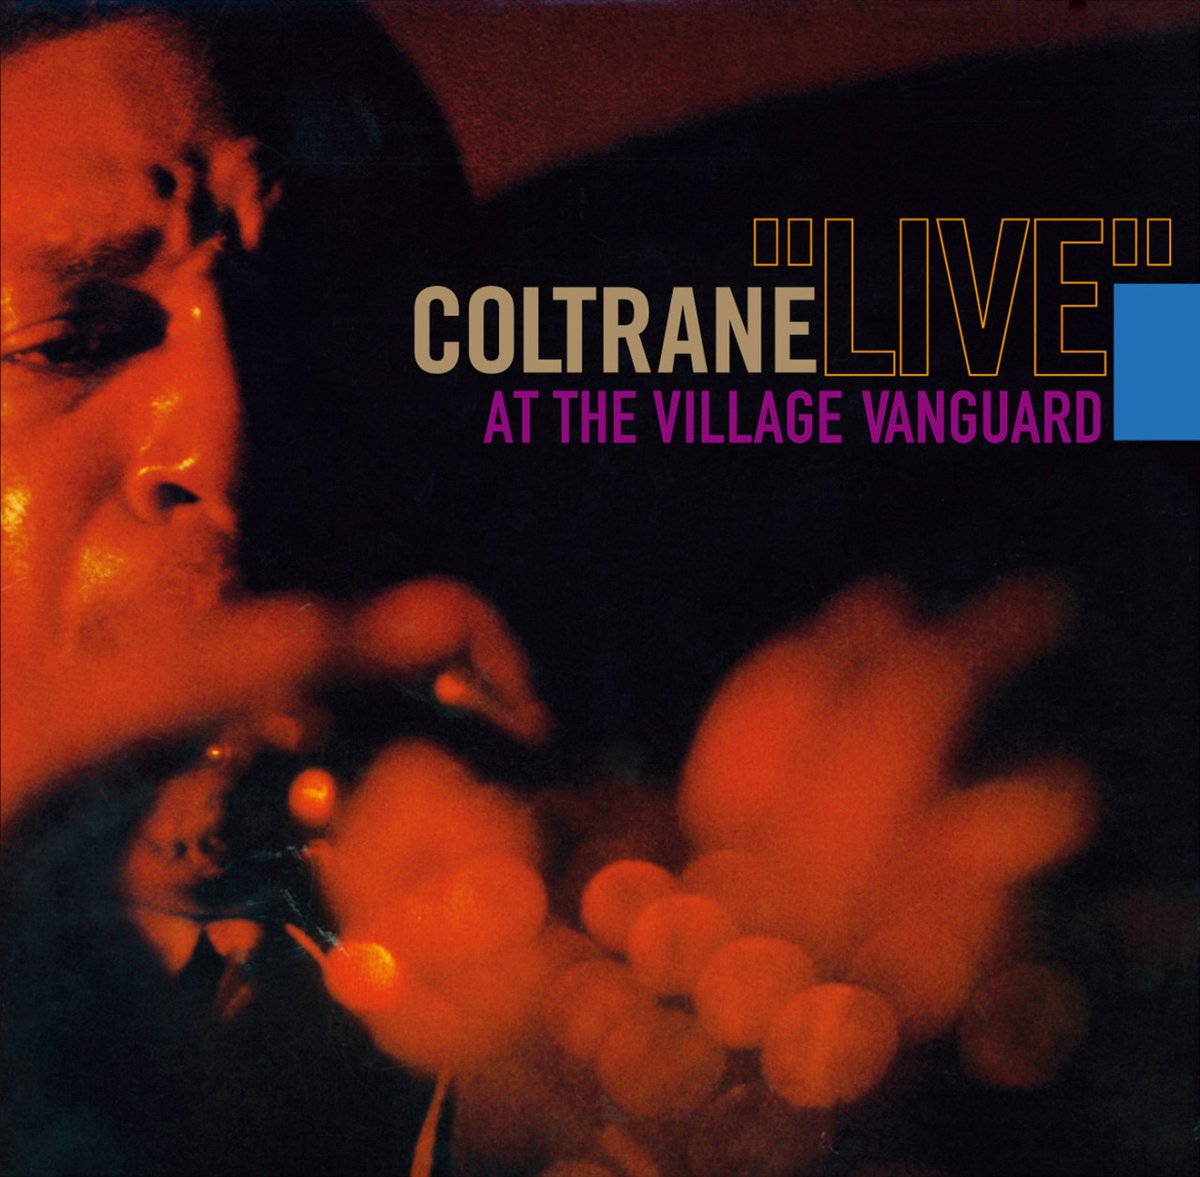 John Coltrane recorded “Live” at the Village Vanguard #onthisday in 1961.